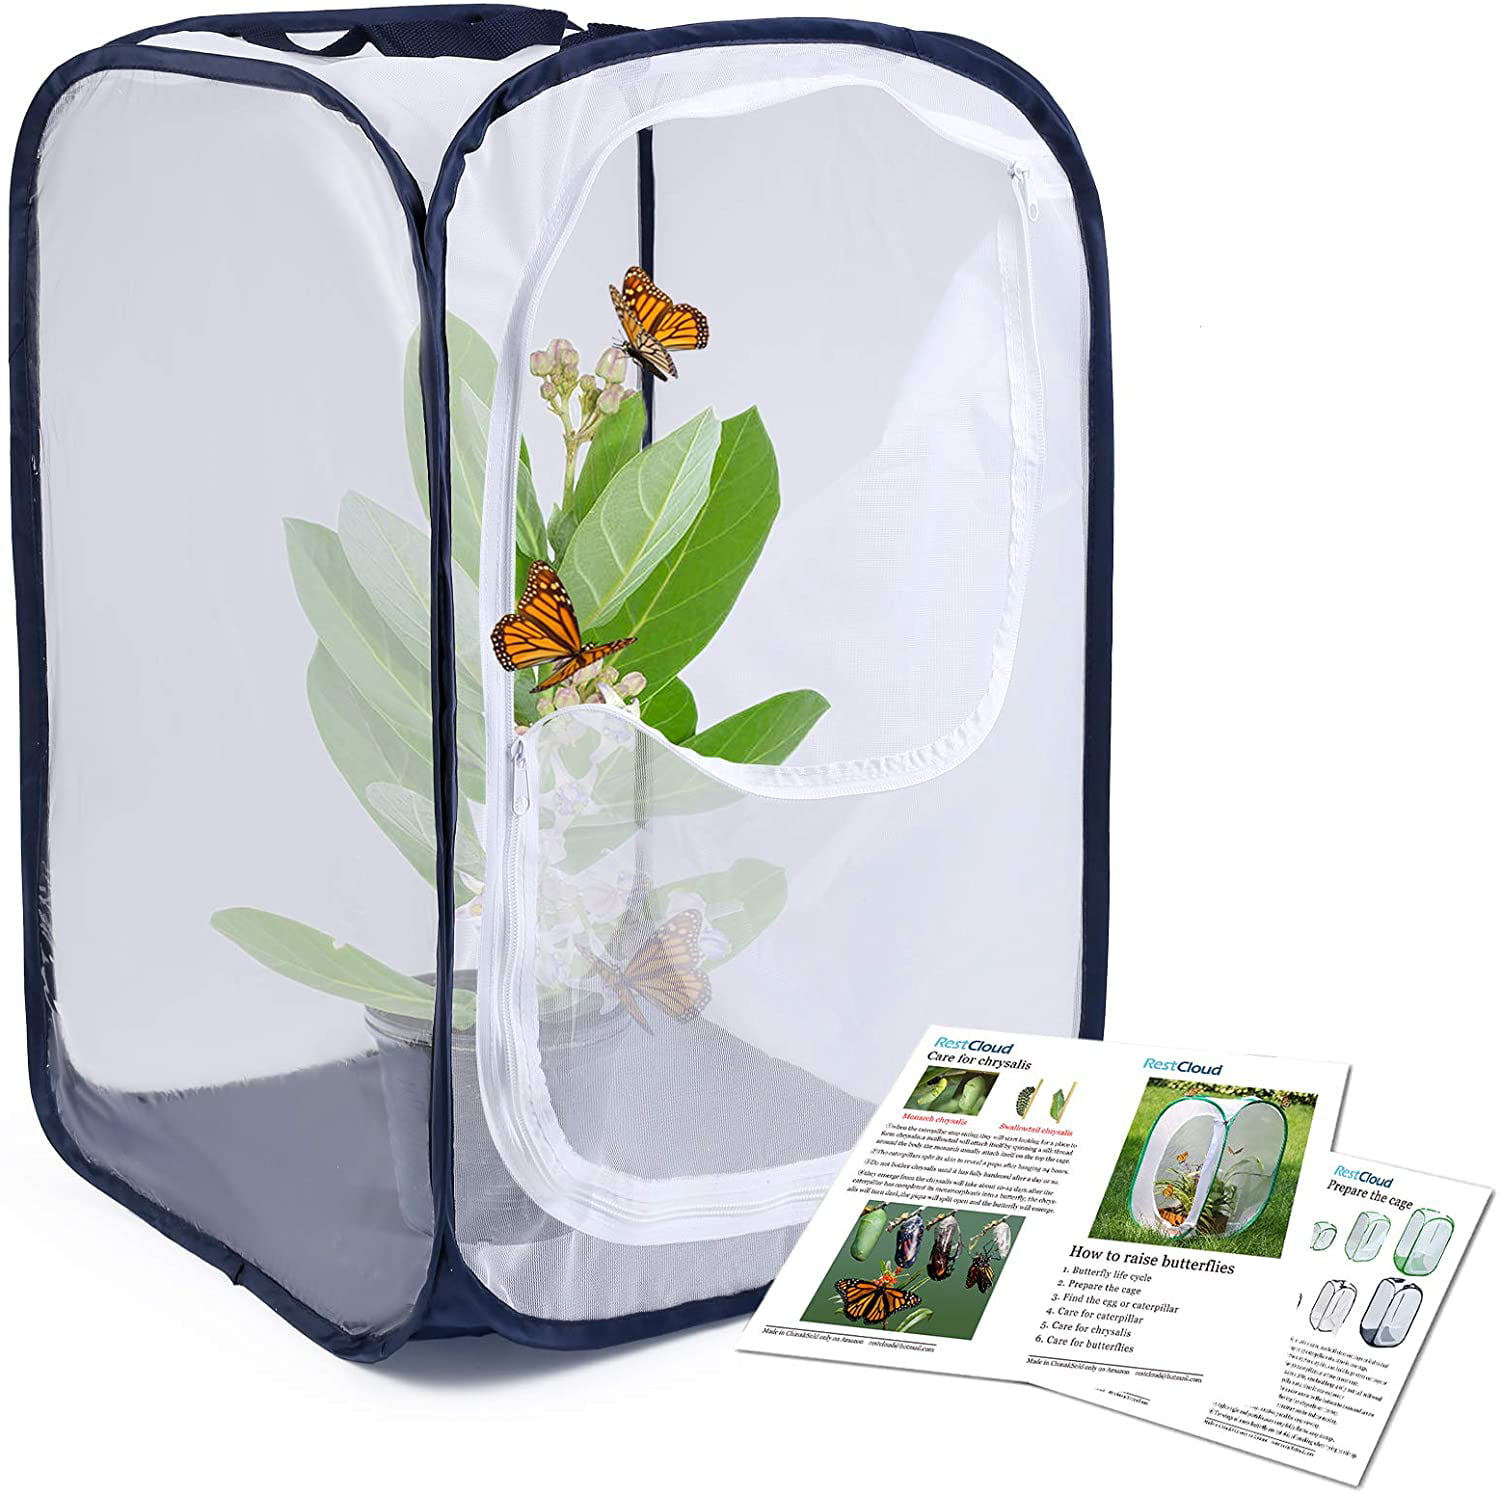 Muchfun Monarch Butterfly Habitat Cage Pop Up 16 x 16 x 24 Inches 